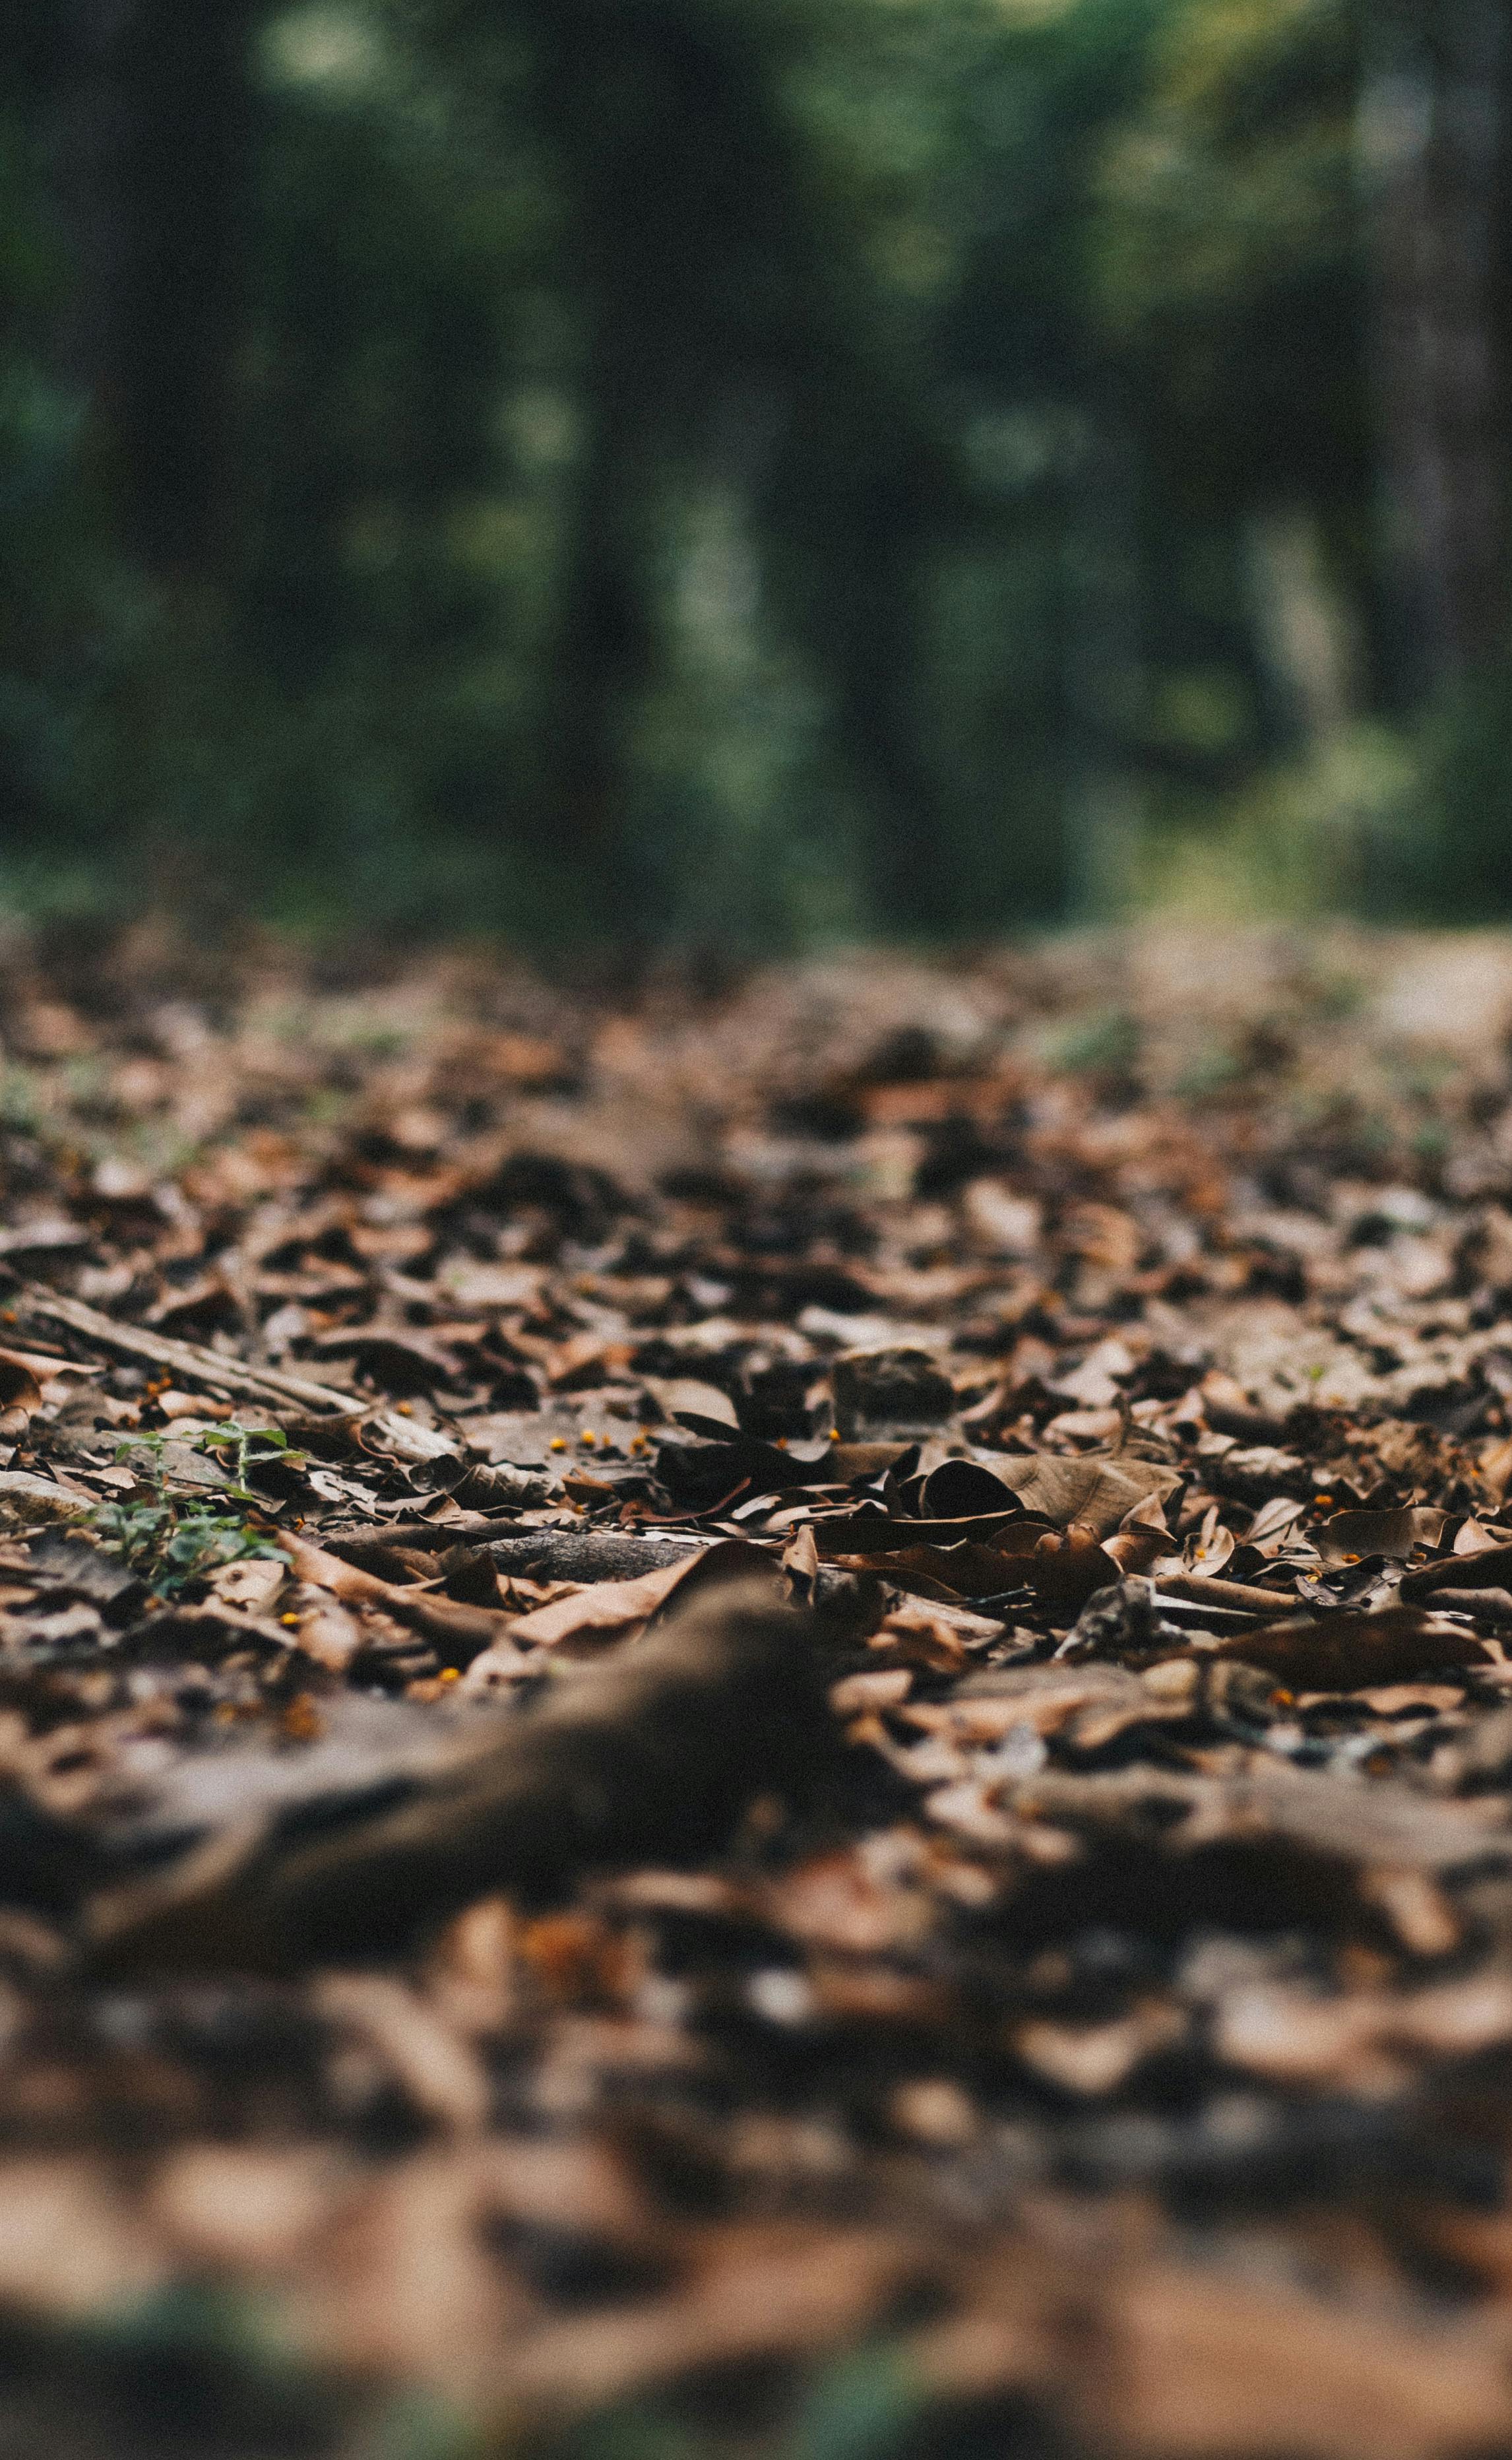 Selective Photography Of Withered Leaves On Ground · Free Stock Photo